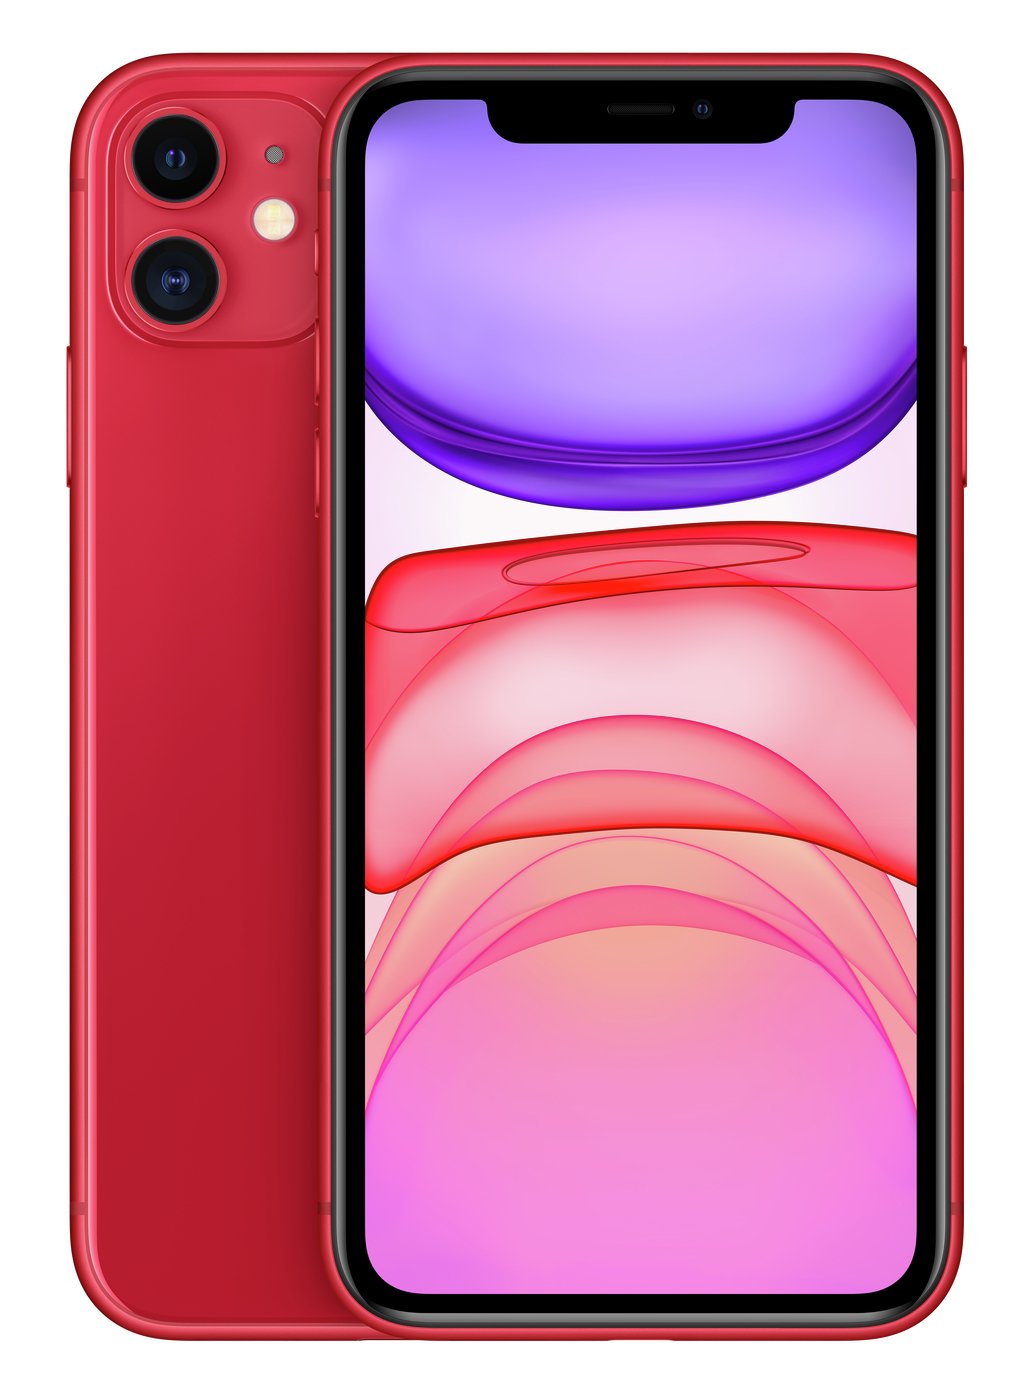 SIM Free iPhone 11 128GB Mobile Phone - Product Red